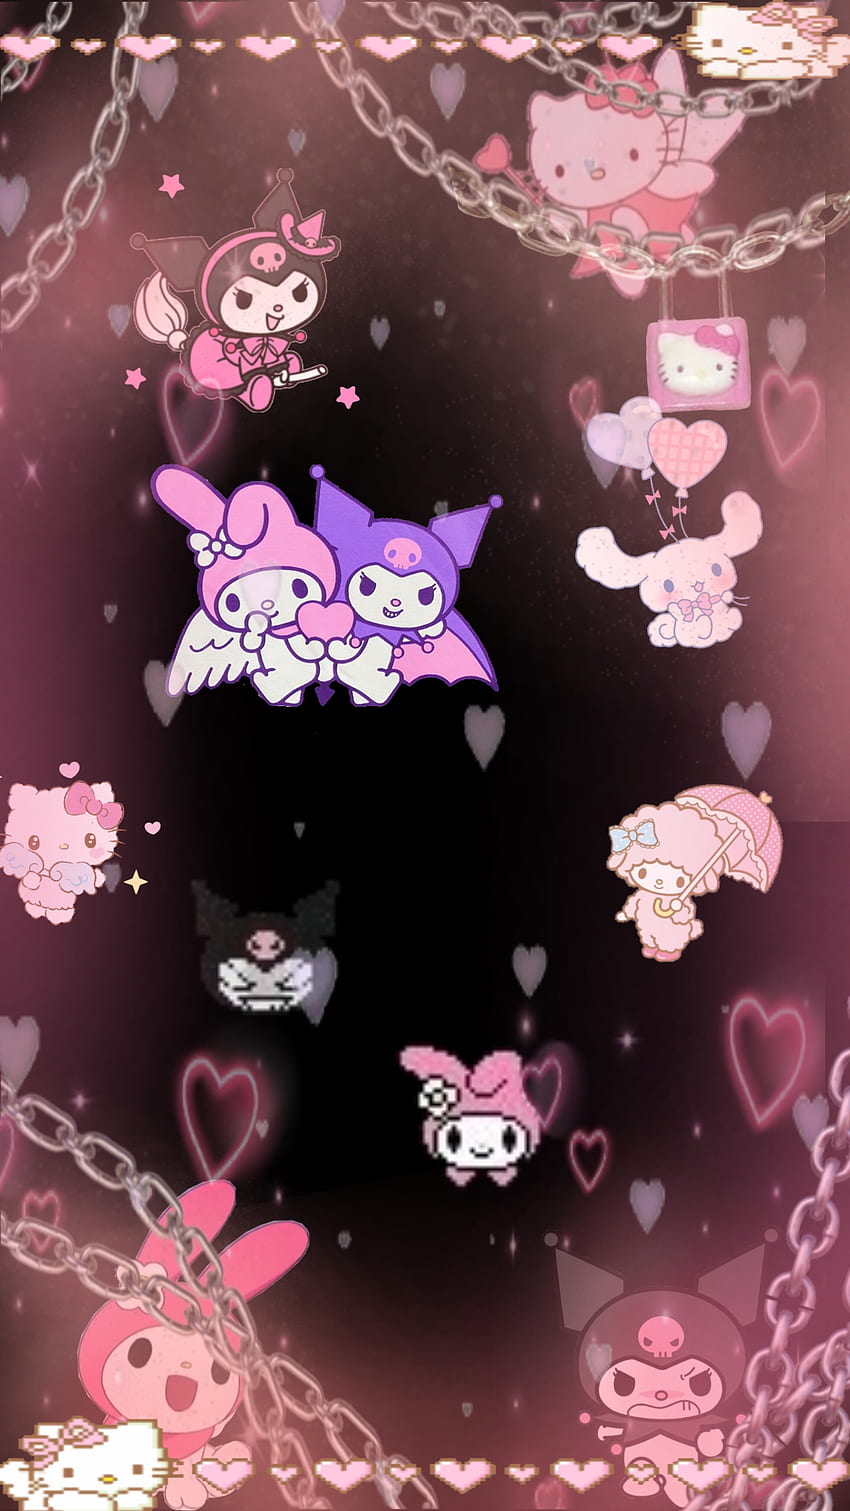 sanrio, hello kitty and traumacore - image #8723325 on